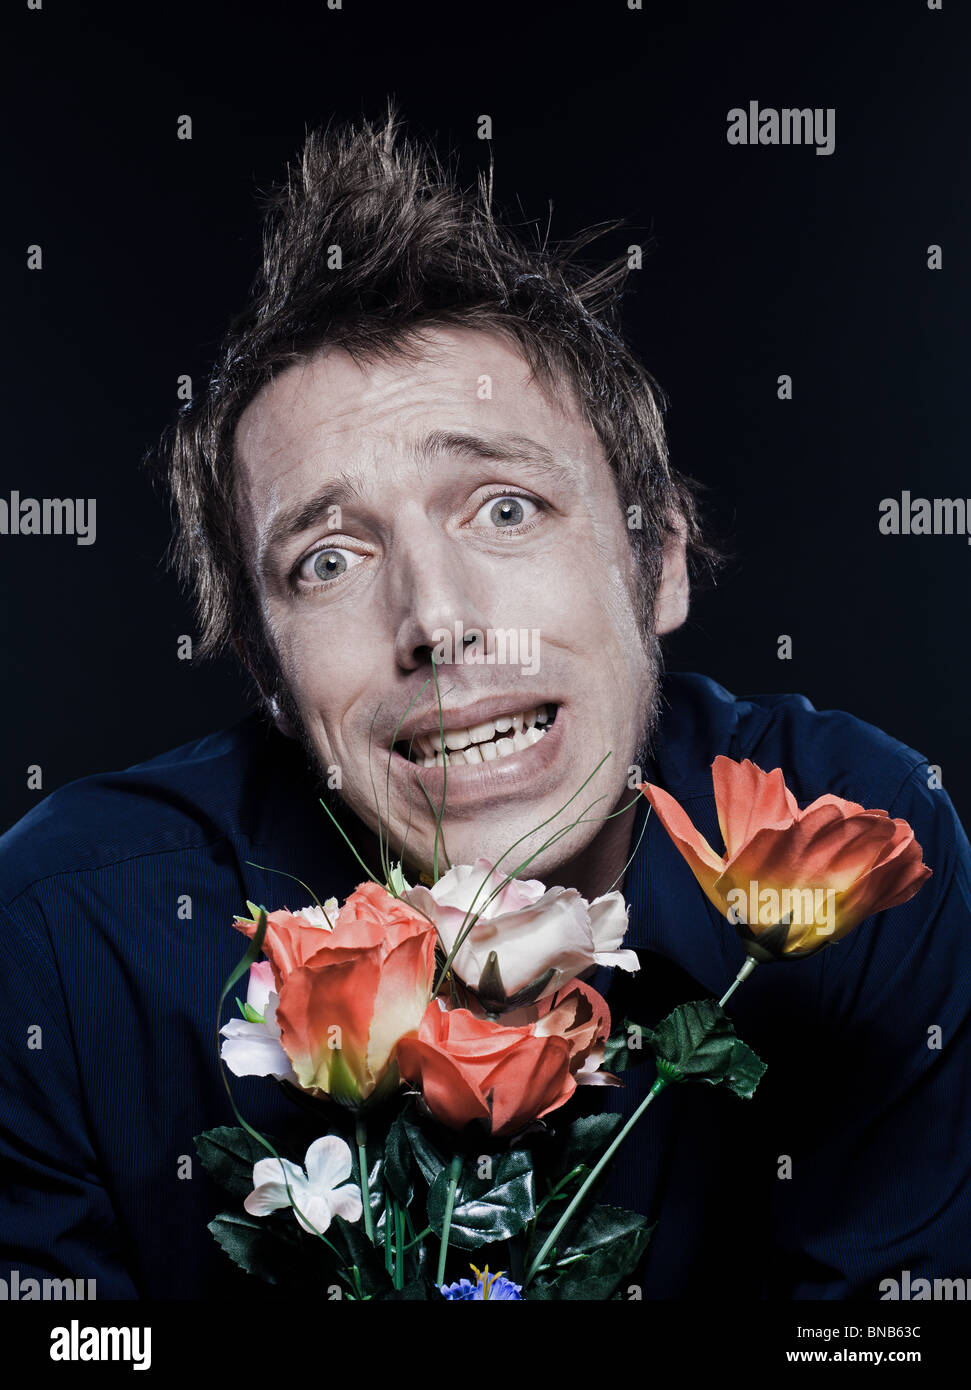 studio portrait on black background of a funny expressive caucasian man offering flowers stressed Stock Photo